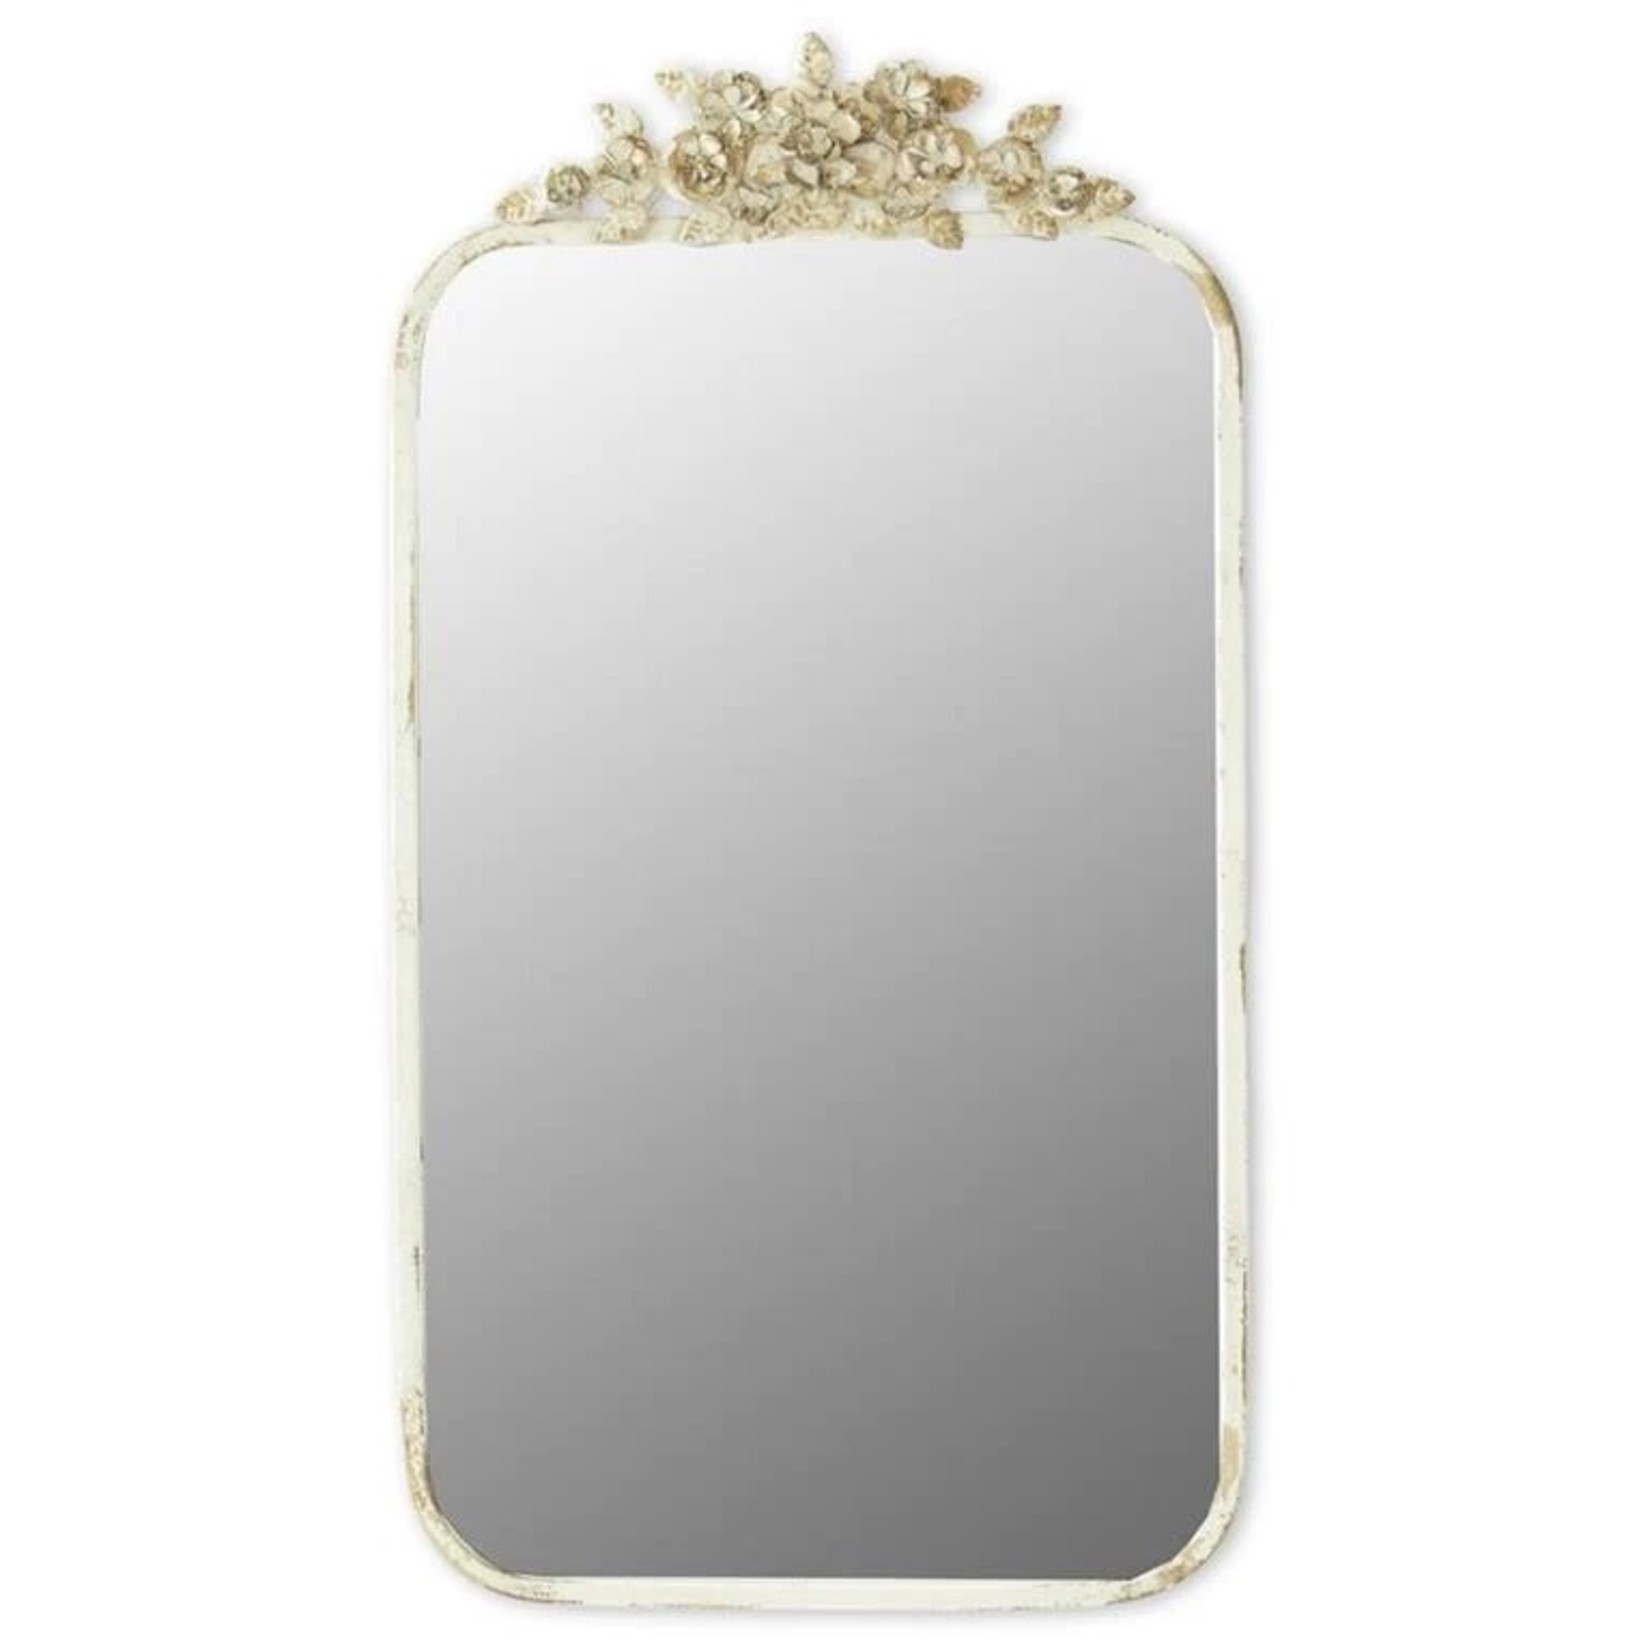 WHITE WASHED & GOLD METAL FRAME WALL MIRROR 32"